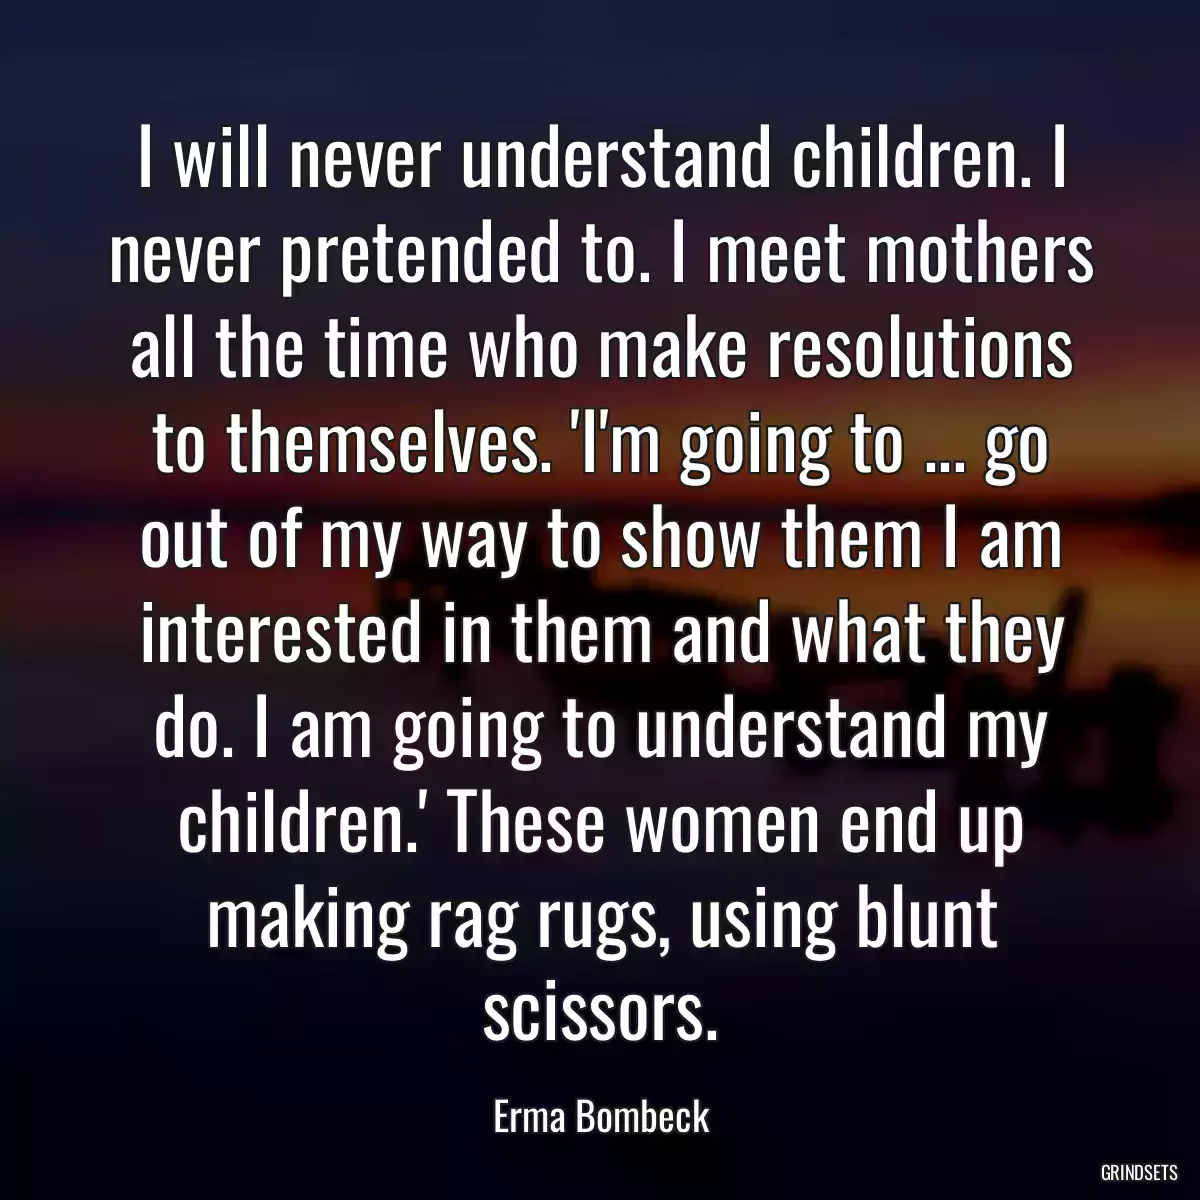 I will never understand children. I never pretended to. I meet mothers all the time who make resolutions to themselves. \'I\'m going to ... go out of my way to show them I am interested in them and what they do. I am going to understand my children.\' These women end up making rag rugs, using blunt scissors.